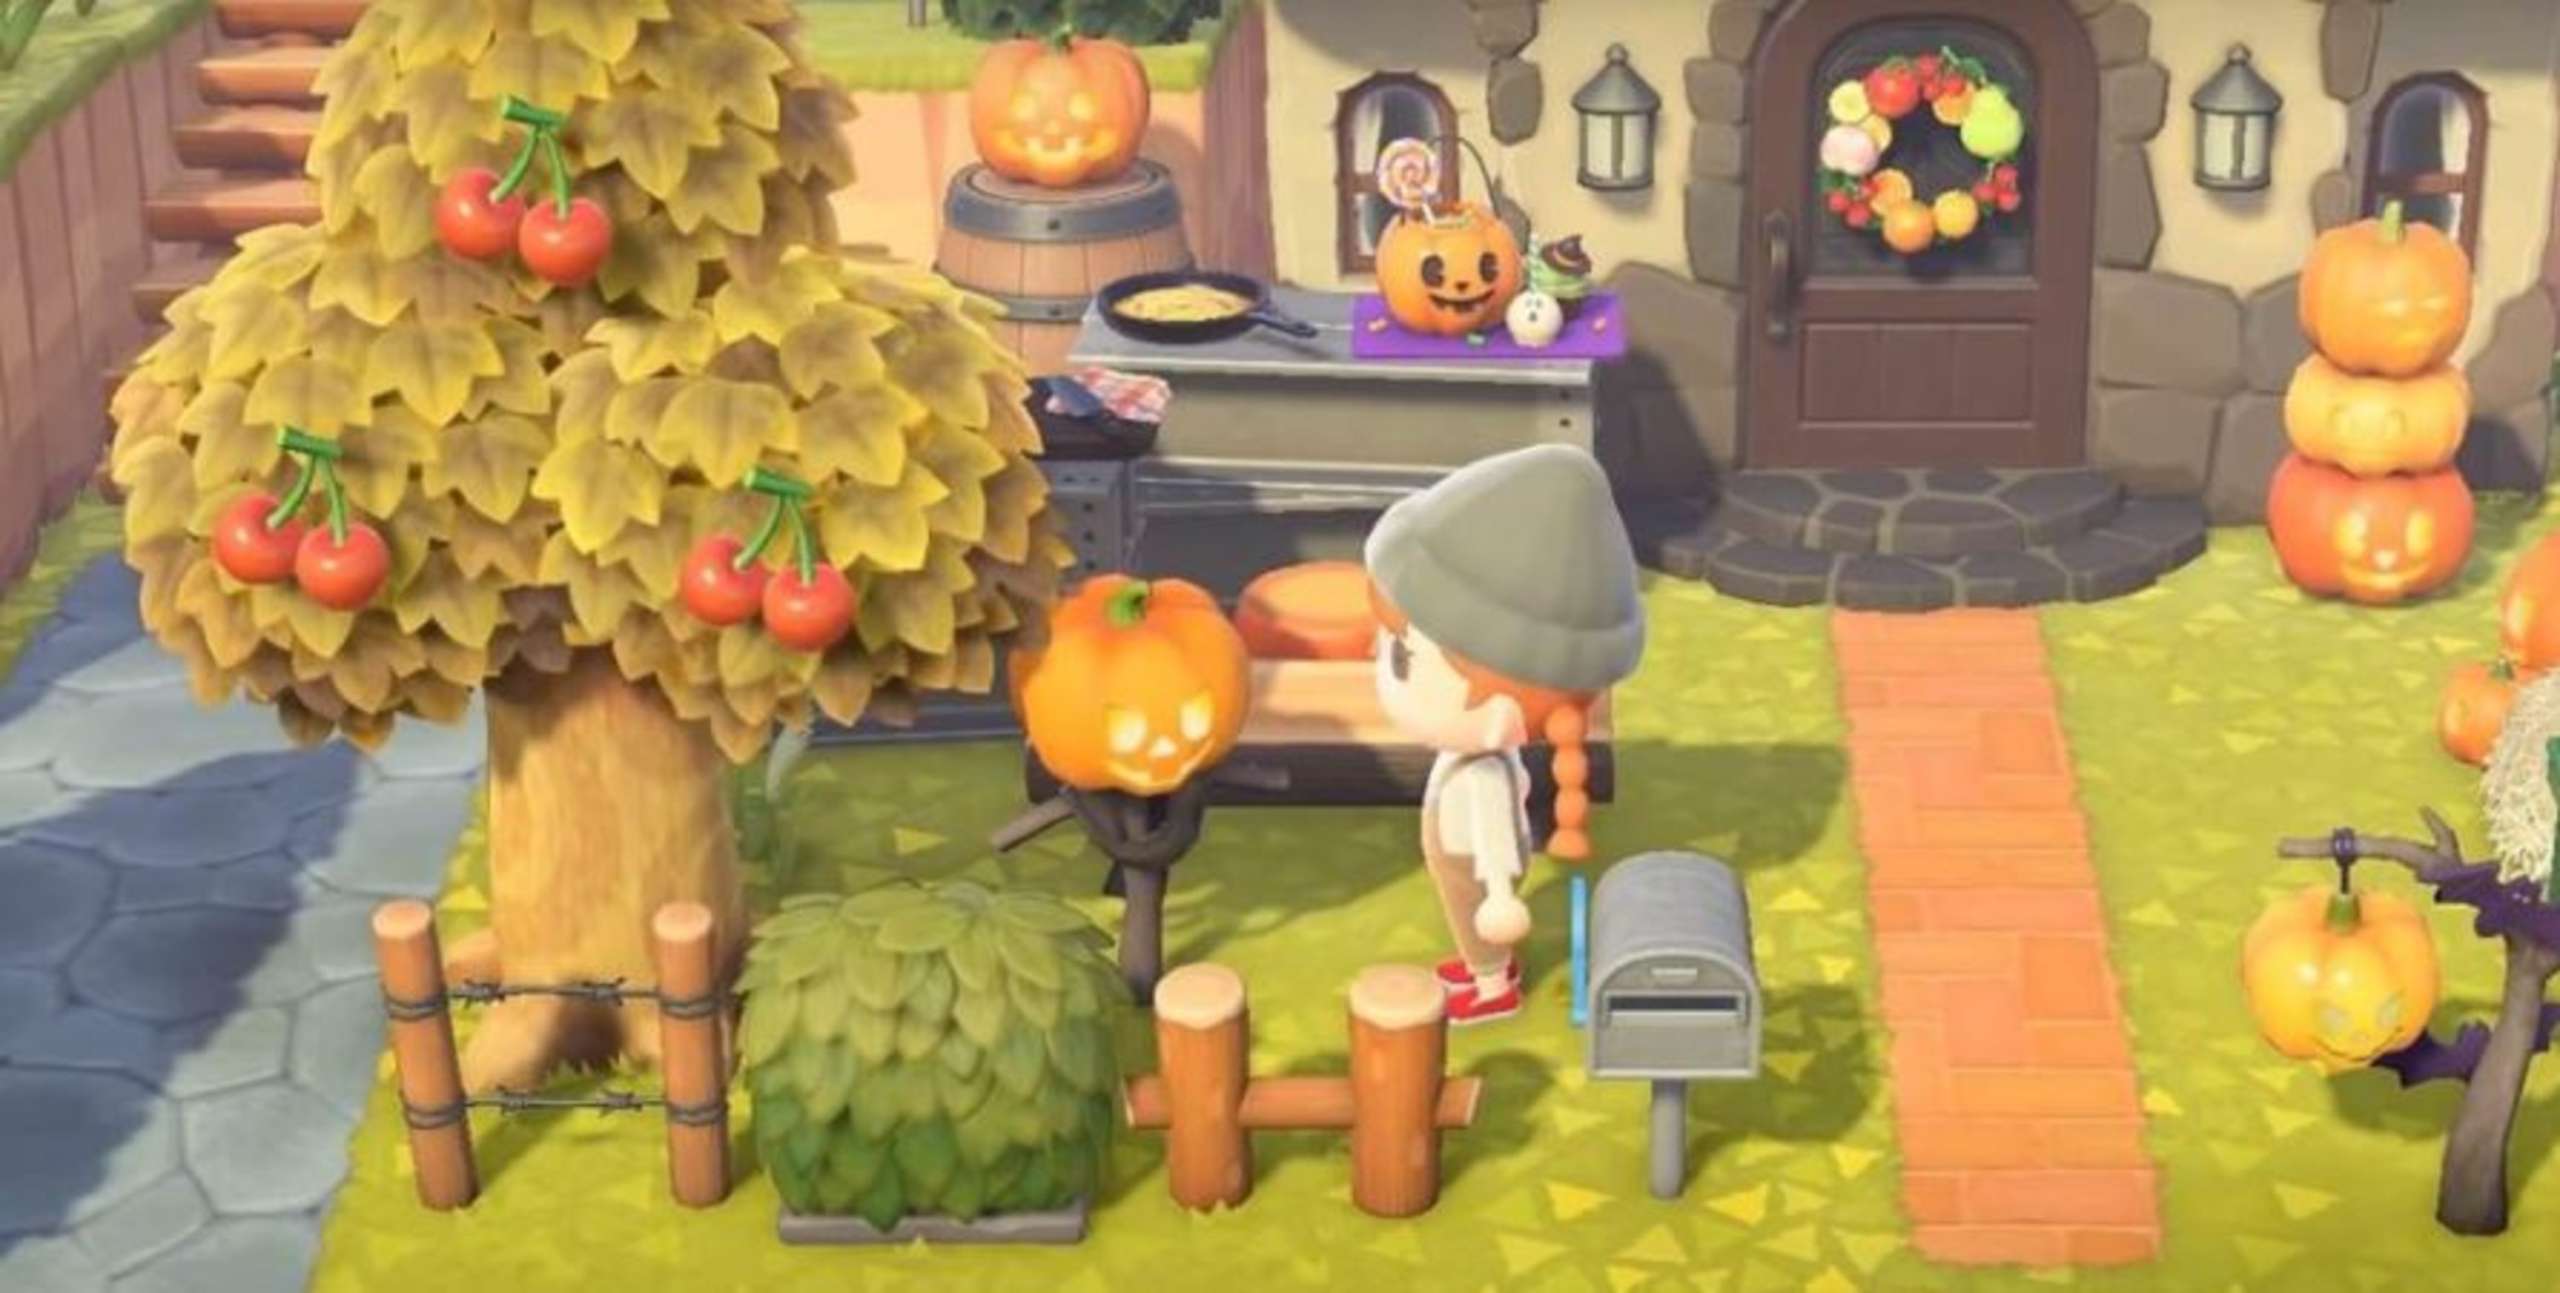 As The Autumn Season Approaches In Animal Crossing: New Horizons, One Player Celebrates The Change Of Seasons By Making Some Adorable Custom Designs